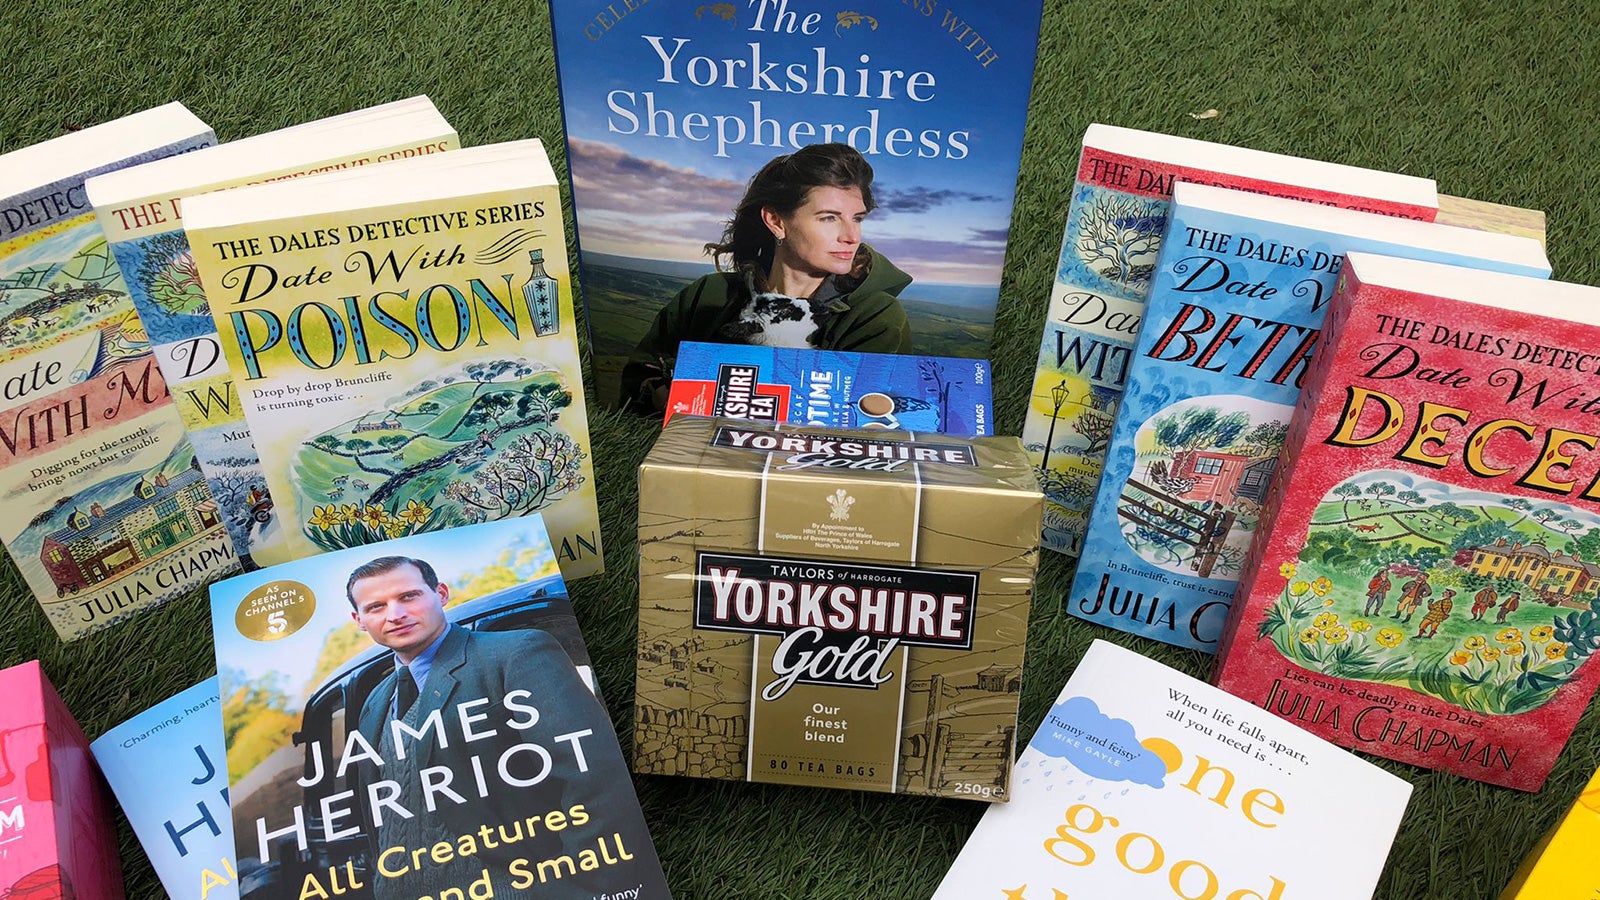 Boxes of Yorkshire Tea and a number of books sit arrange on a patch of grass.